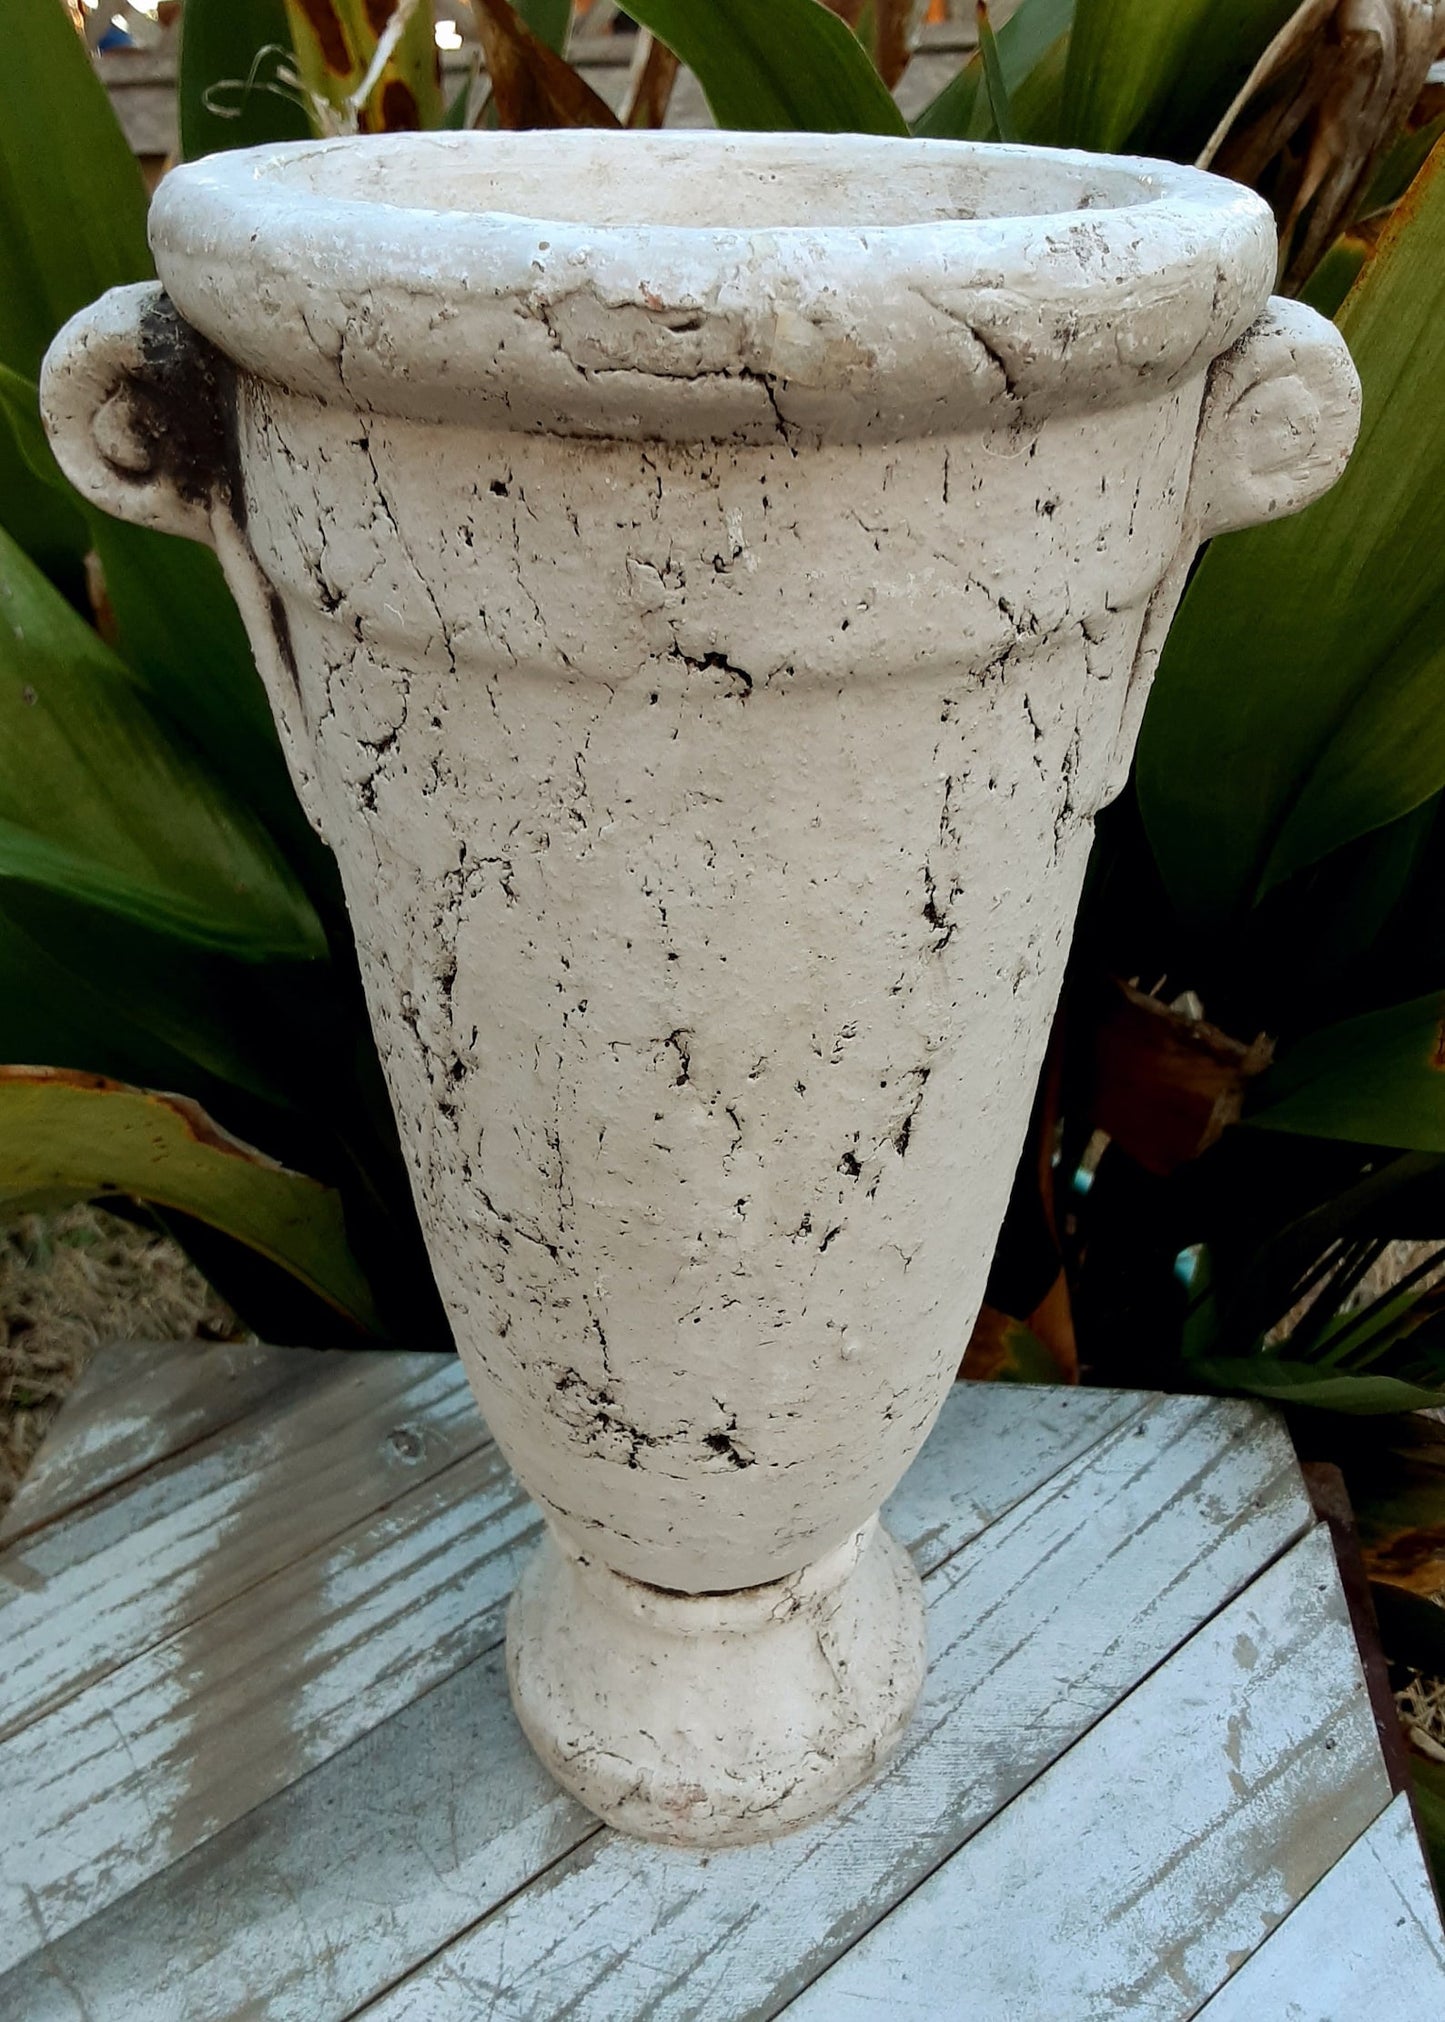 This charming Double Handle White Grecian Style Vase adds old world flair to any space. Made from stone-like resin/terracotta, its flat bottom makes it easy to display. With a weight of three pounds, it's perfect for holding flowers and creating a stunning centerpiece.